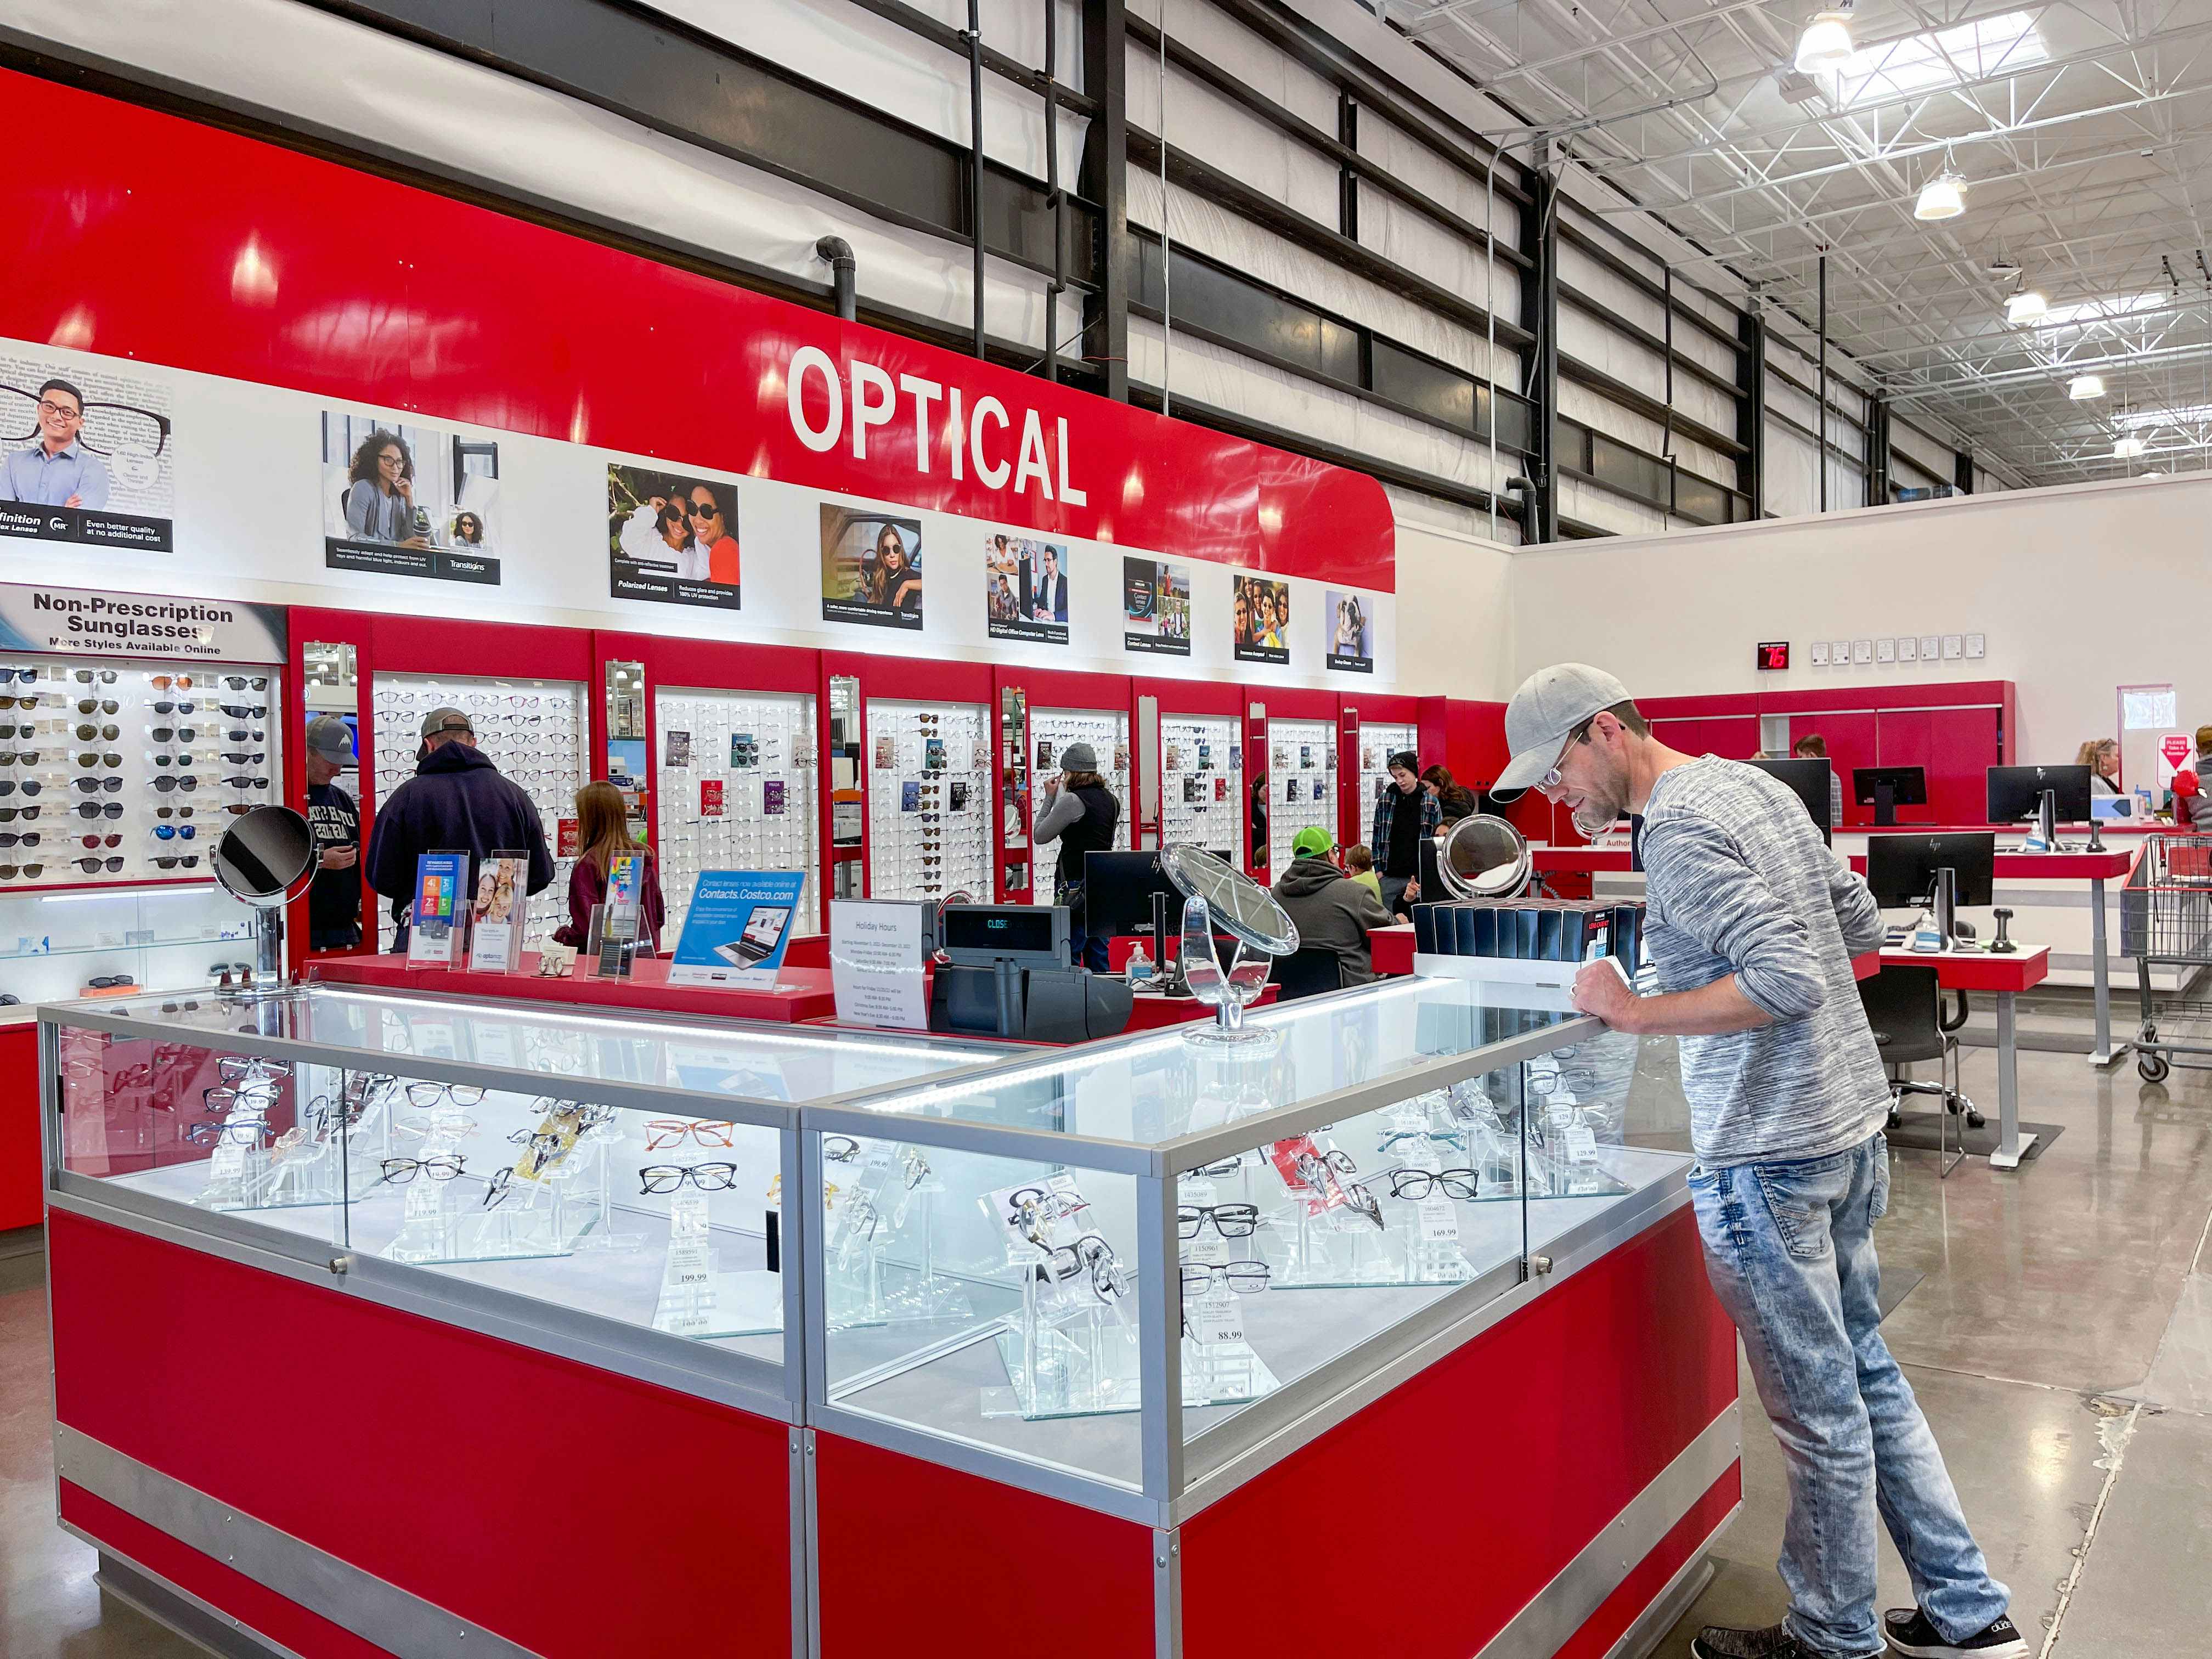 a man looking at costco optical eyeglasses in case